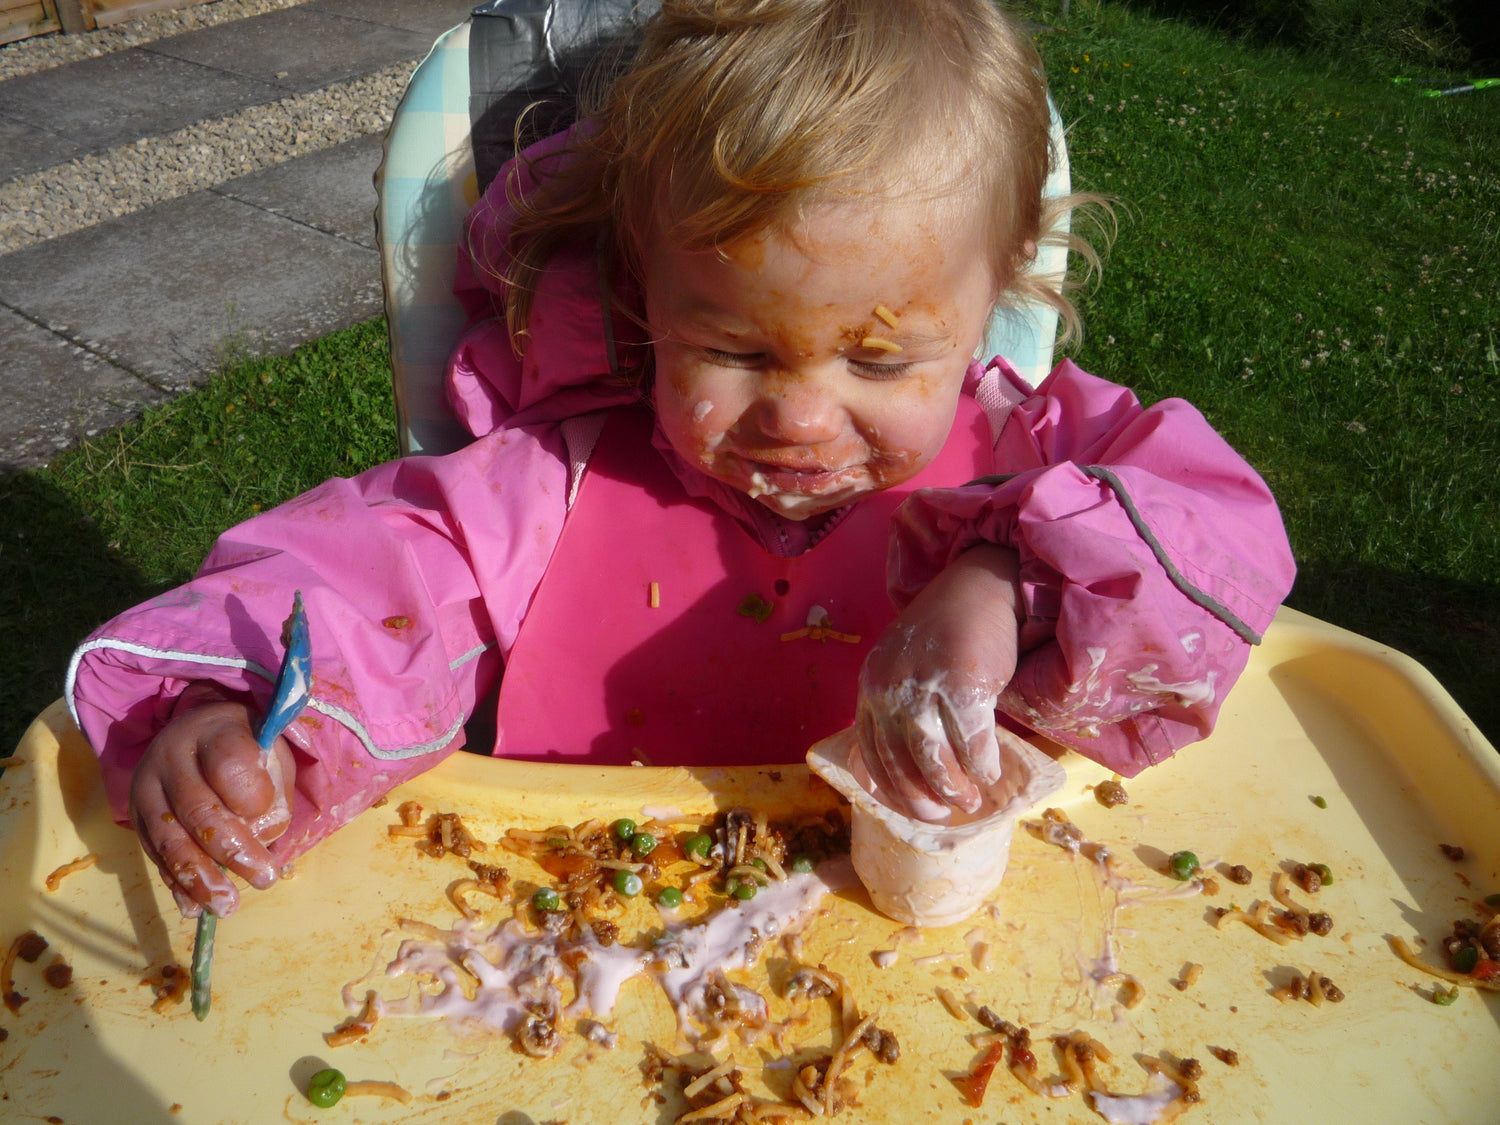 Top 5 tips to stop your toddler throwing food|Top 5 tips to stop your toddler throwing food